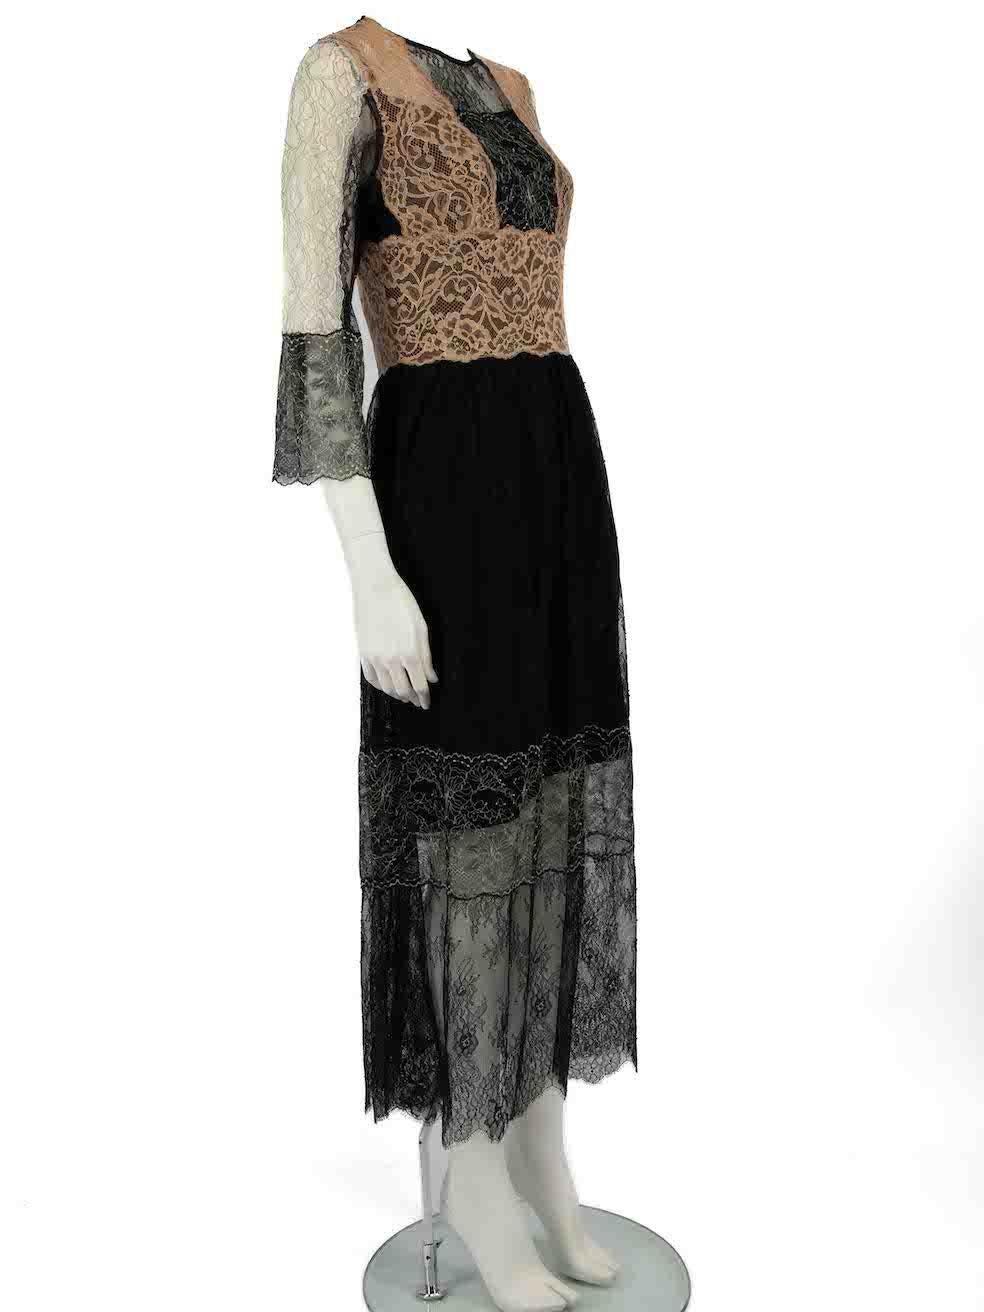 CONDITION is Very good. Hardly any visible wear to dress is evident on this used Sandro designer resale item.
 
 
 
 Details
 
 
 Black
 
 Lace
 
 Dress
 
 Long sleeves
 
 Midi
 
 Round neck
 
 Panelled
 
 Sheer
 
 Back zip fastening
 
 Comes with